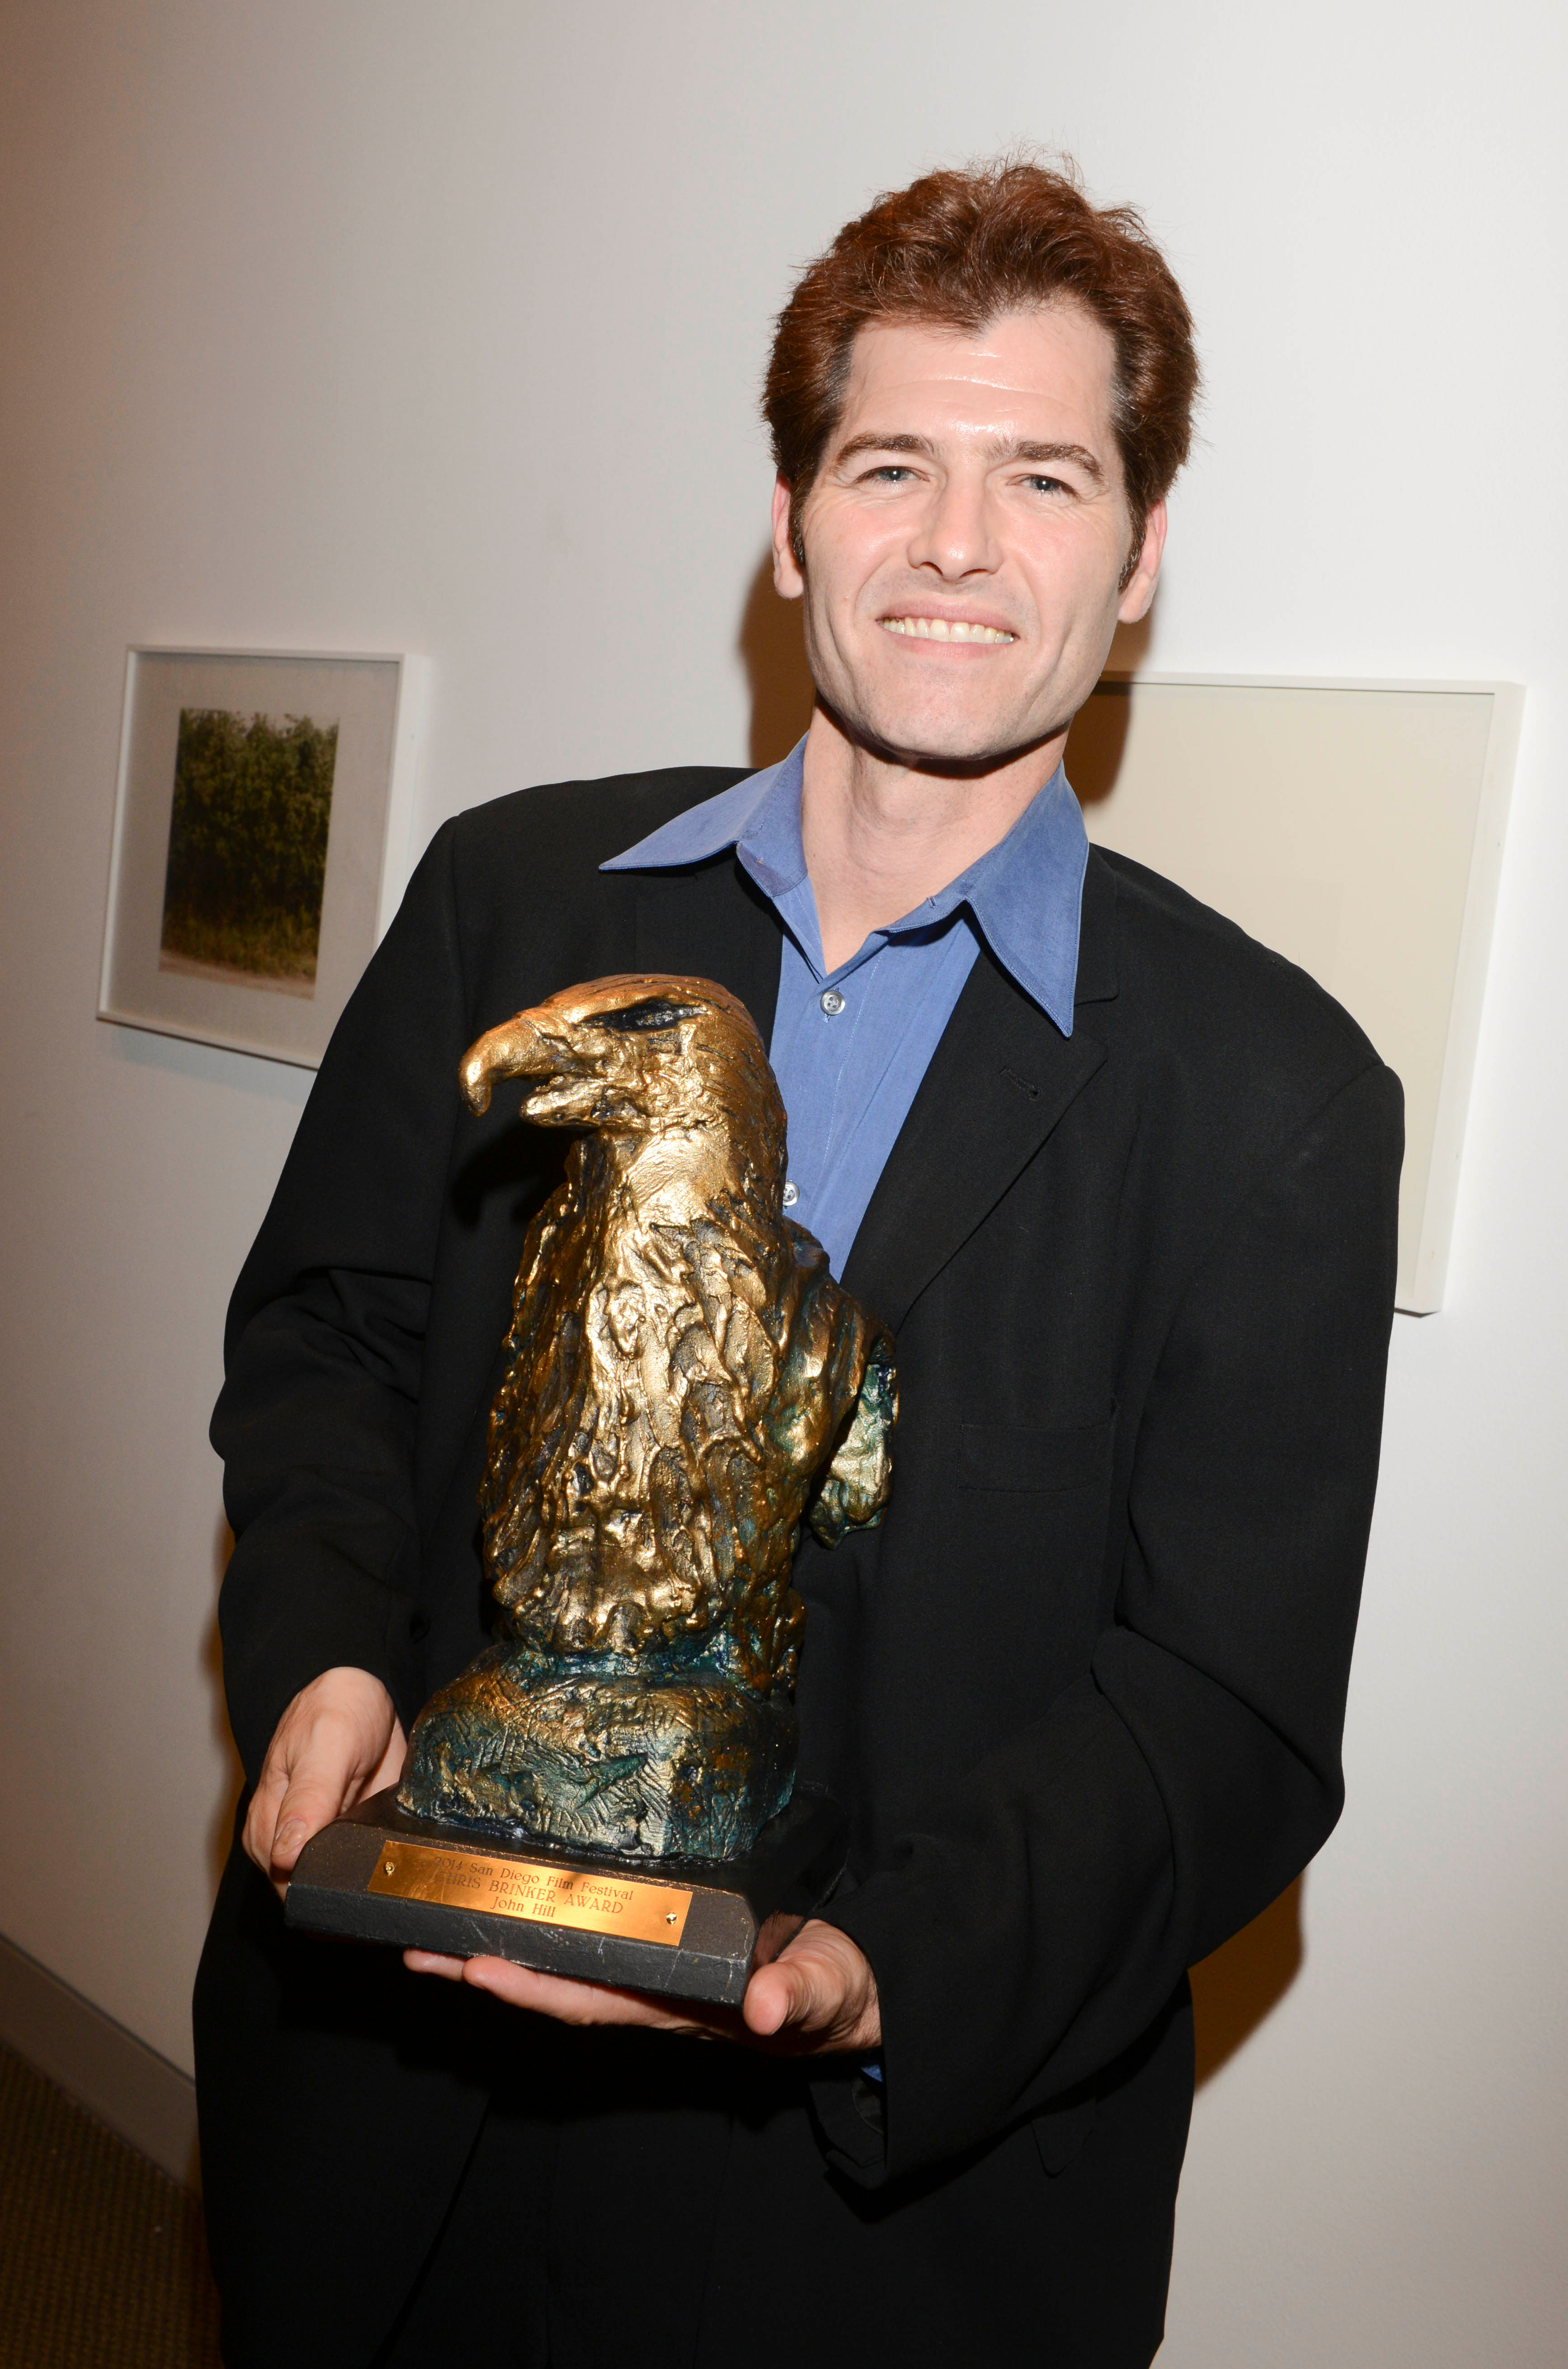 Chris Brinker Award winner John Beaton Hill for Most Outstanding First Feature Film at The San Diego Film Festival.